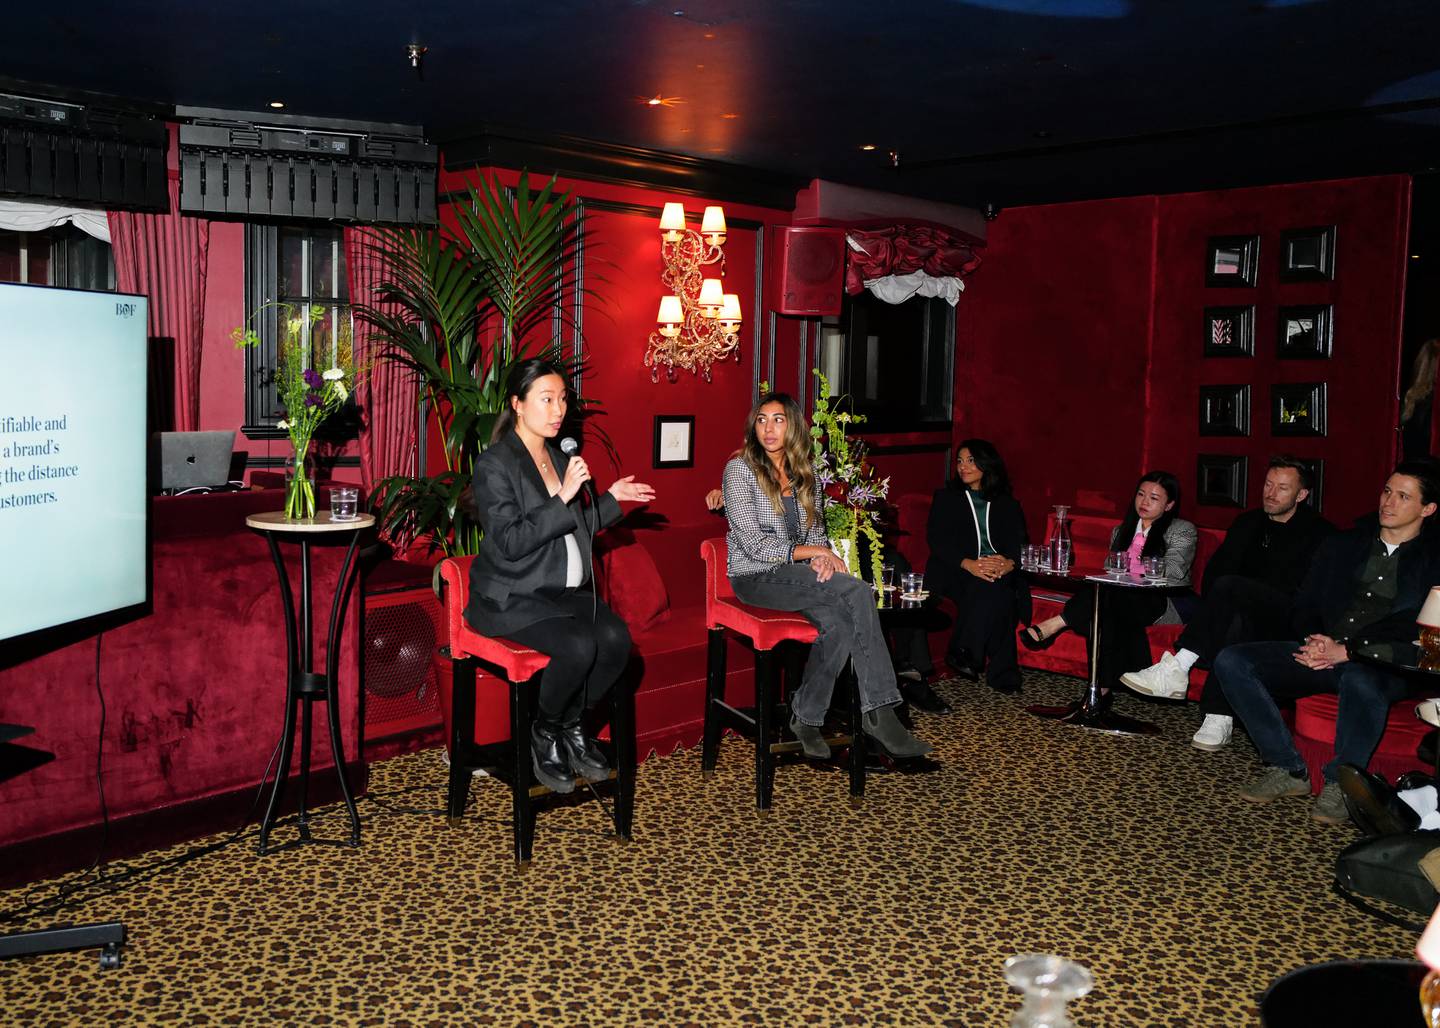 BoF Insights executive event on The BoF Brand Magic Index at The Twenty Two, London. Pictured: Diana Lee, Director of Research & Analysis, BoF Insights, Anushka Challawala, Associate Director of Research & Analysis, BoF Insights